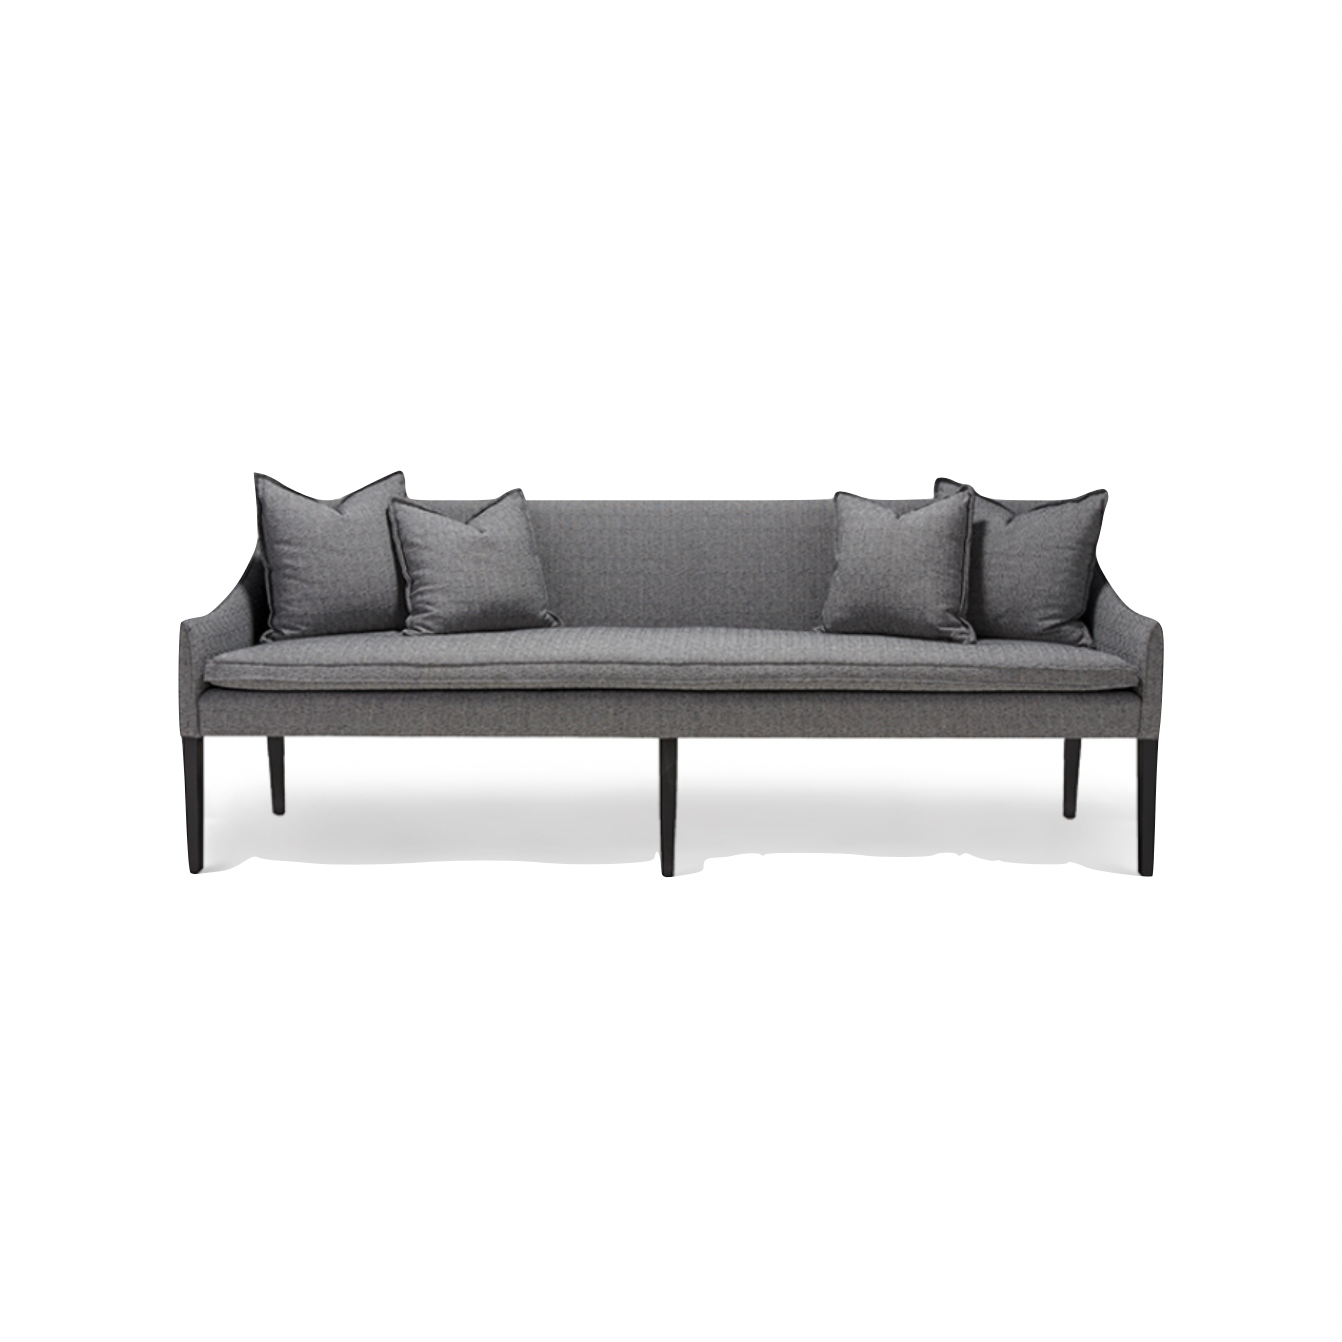 Bench-crafted with a sustainably harvested hardwood frame in Verellen's North Carolina atelier, the Jill Dining Banquette comes standard with:  Tight back Loose seat Double needle stitch detail Split flange knife edge toss pillows Exposed base